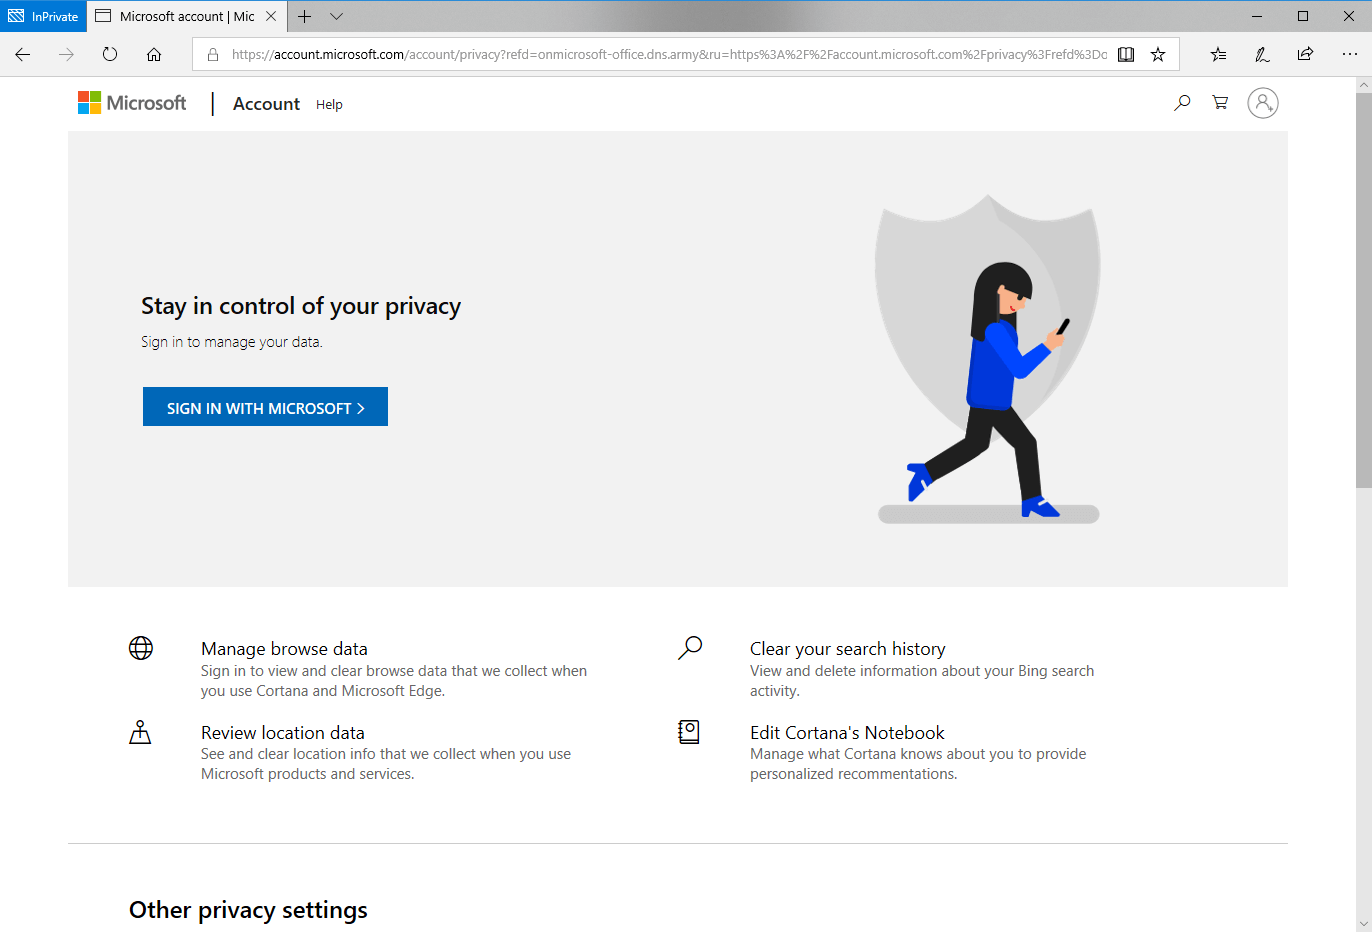 Redirect page after submitting login info